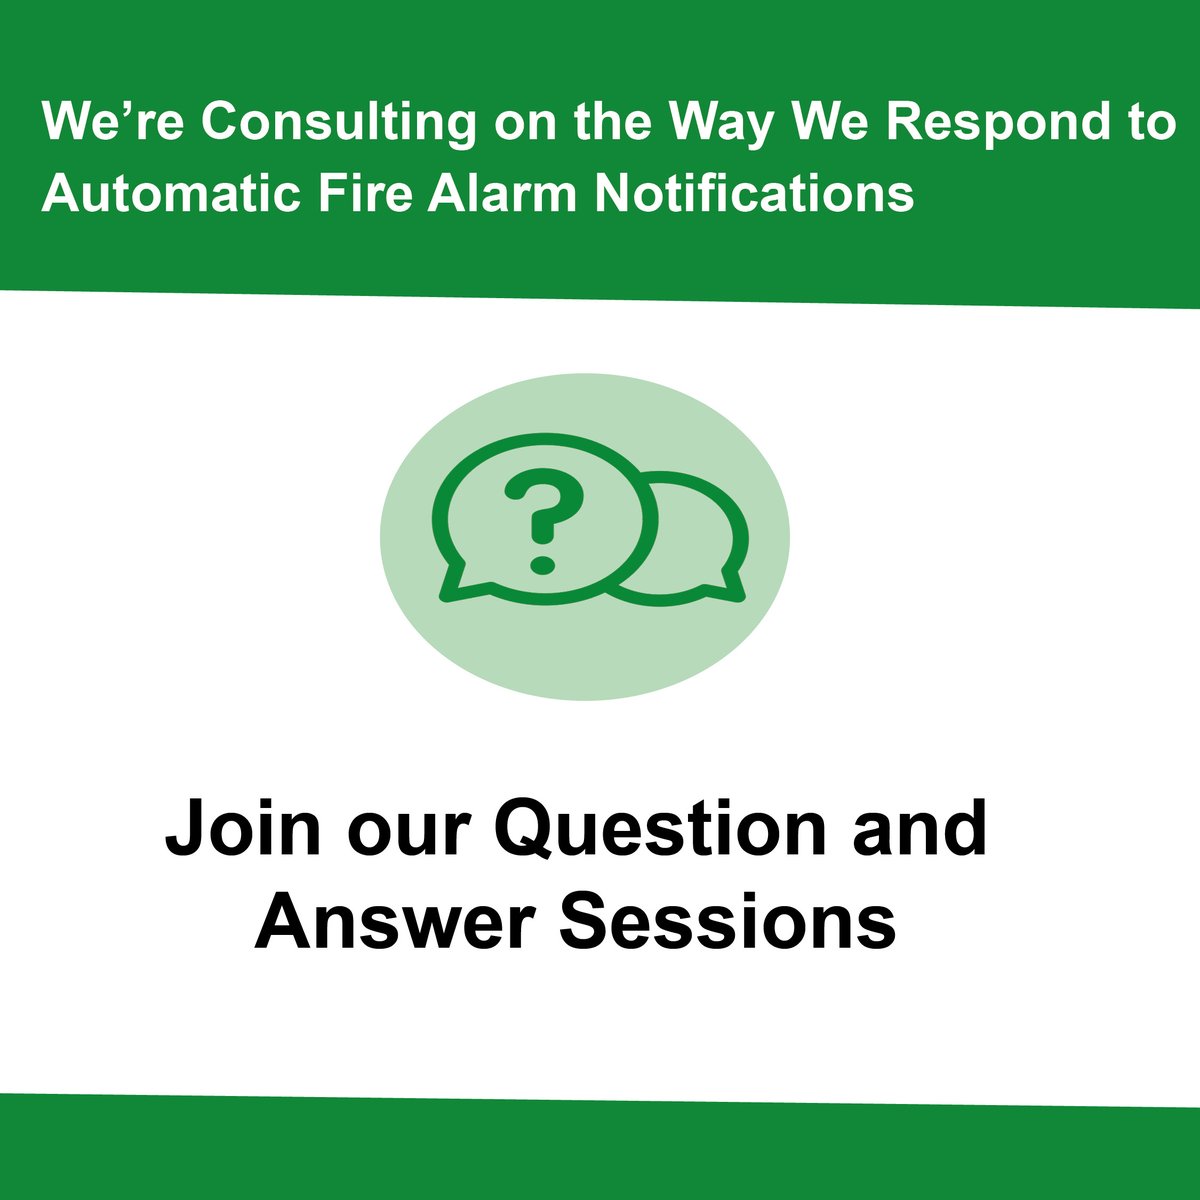 We have added another Q&A session date for our Automatic Fire Alarms consultation. On Thursday, 25 April (12-1pm) you can join us online to find out more and ask us any questions about what it may mean for you or your organisation. ow.ly/MSLx50Rc4jy